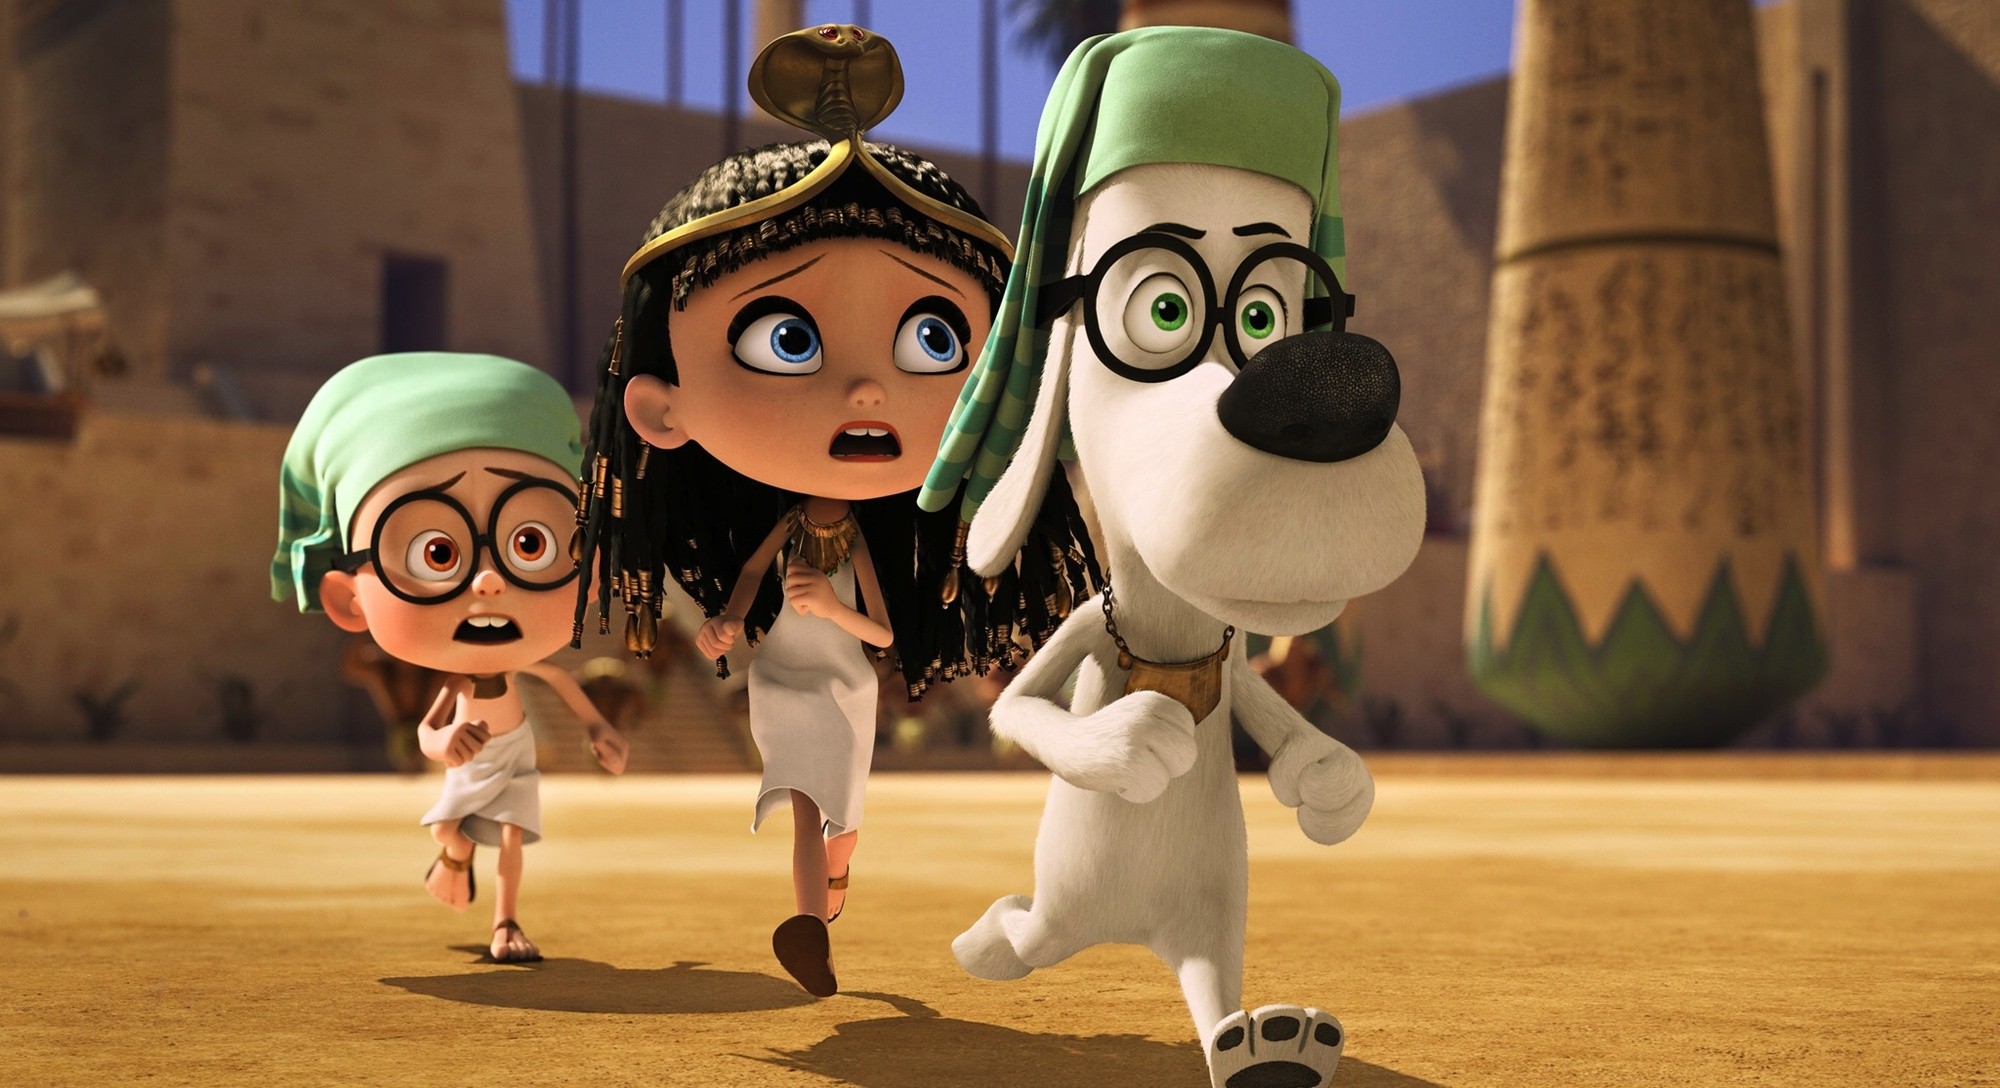 Sherman, Penny Peterson and Mr. Peabody from 20th Century Fox's Mr. Peabody & Sherman (2014)